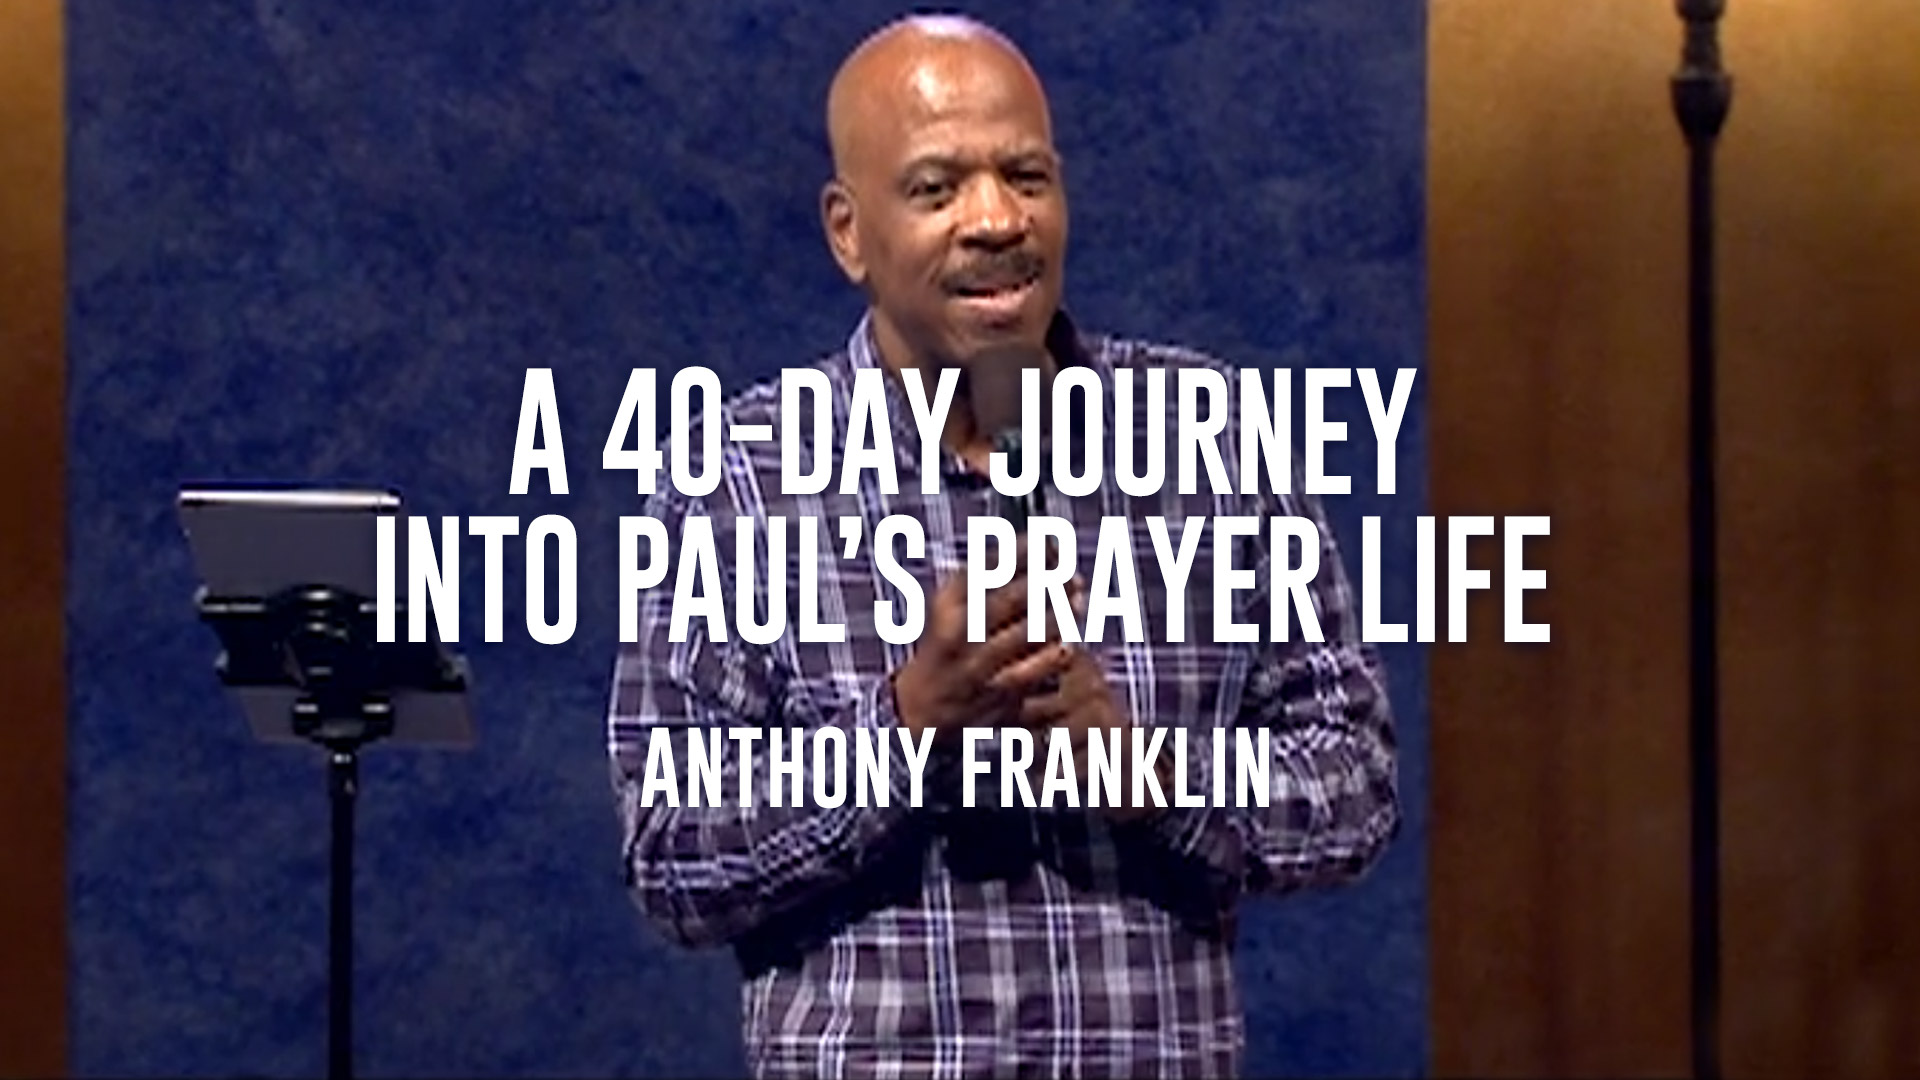 A 40-Day Journey Into Paul's Prayer Life